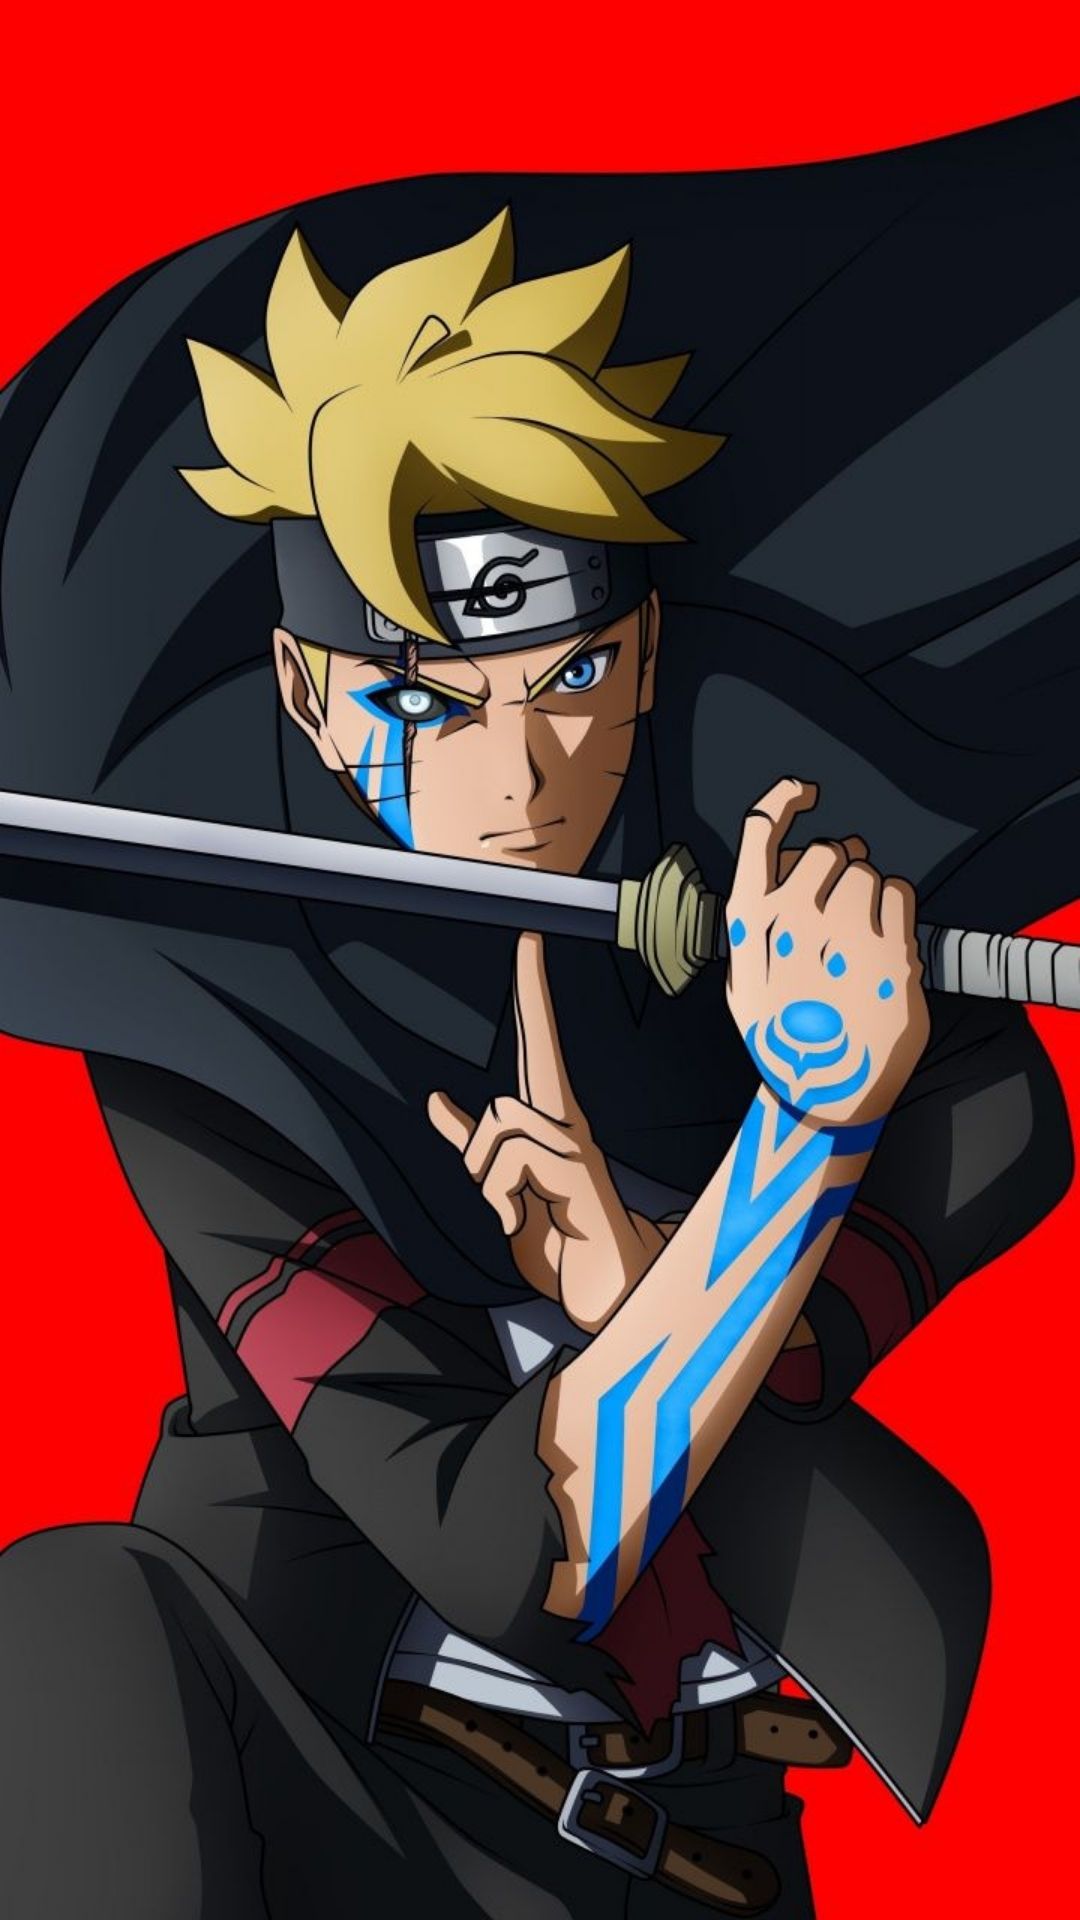 Boruto Naruto Next Generations: How Strong is Code?